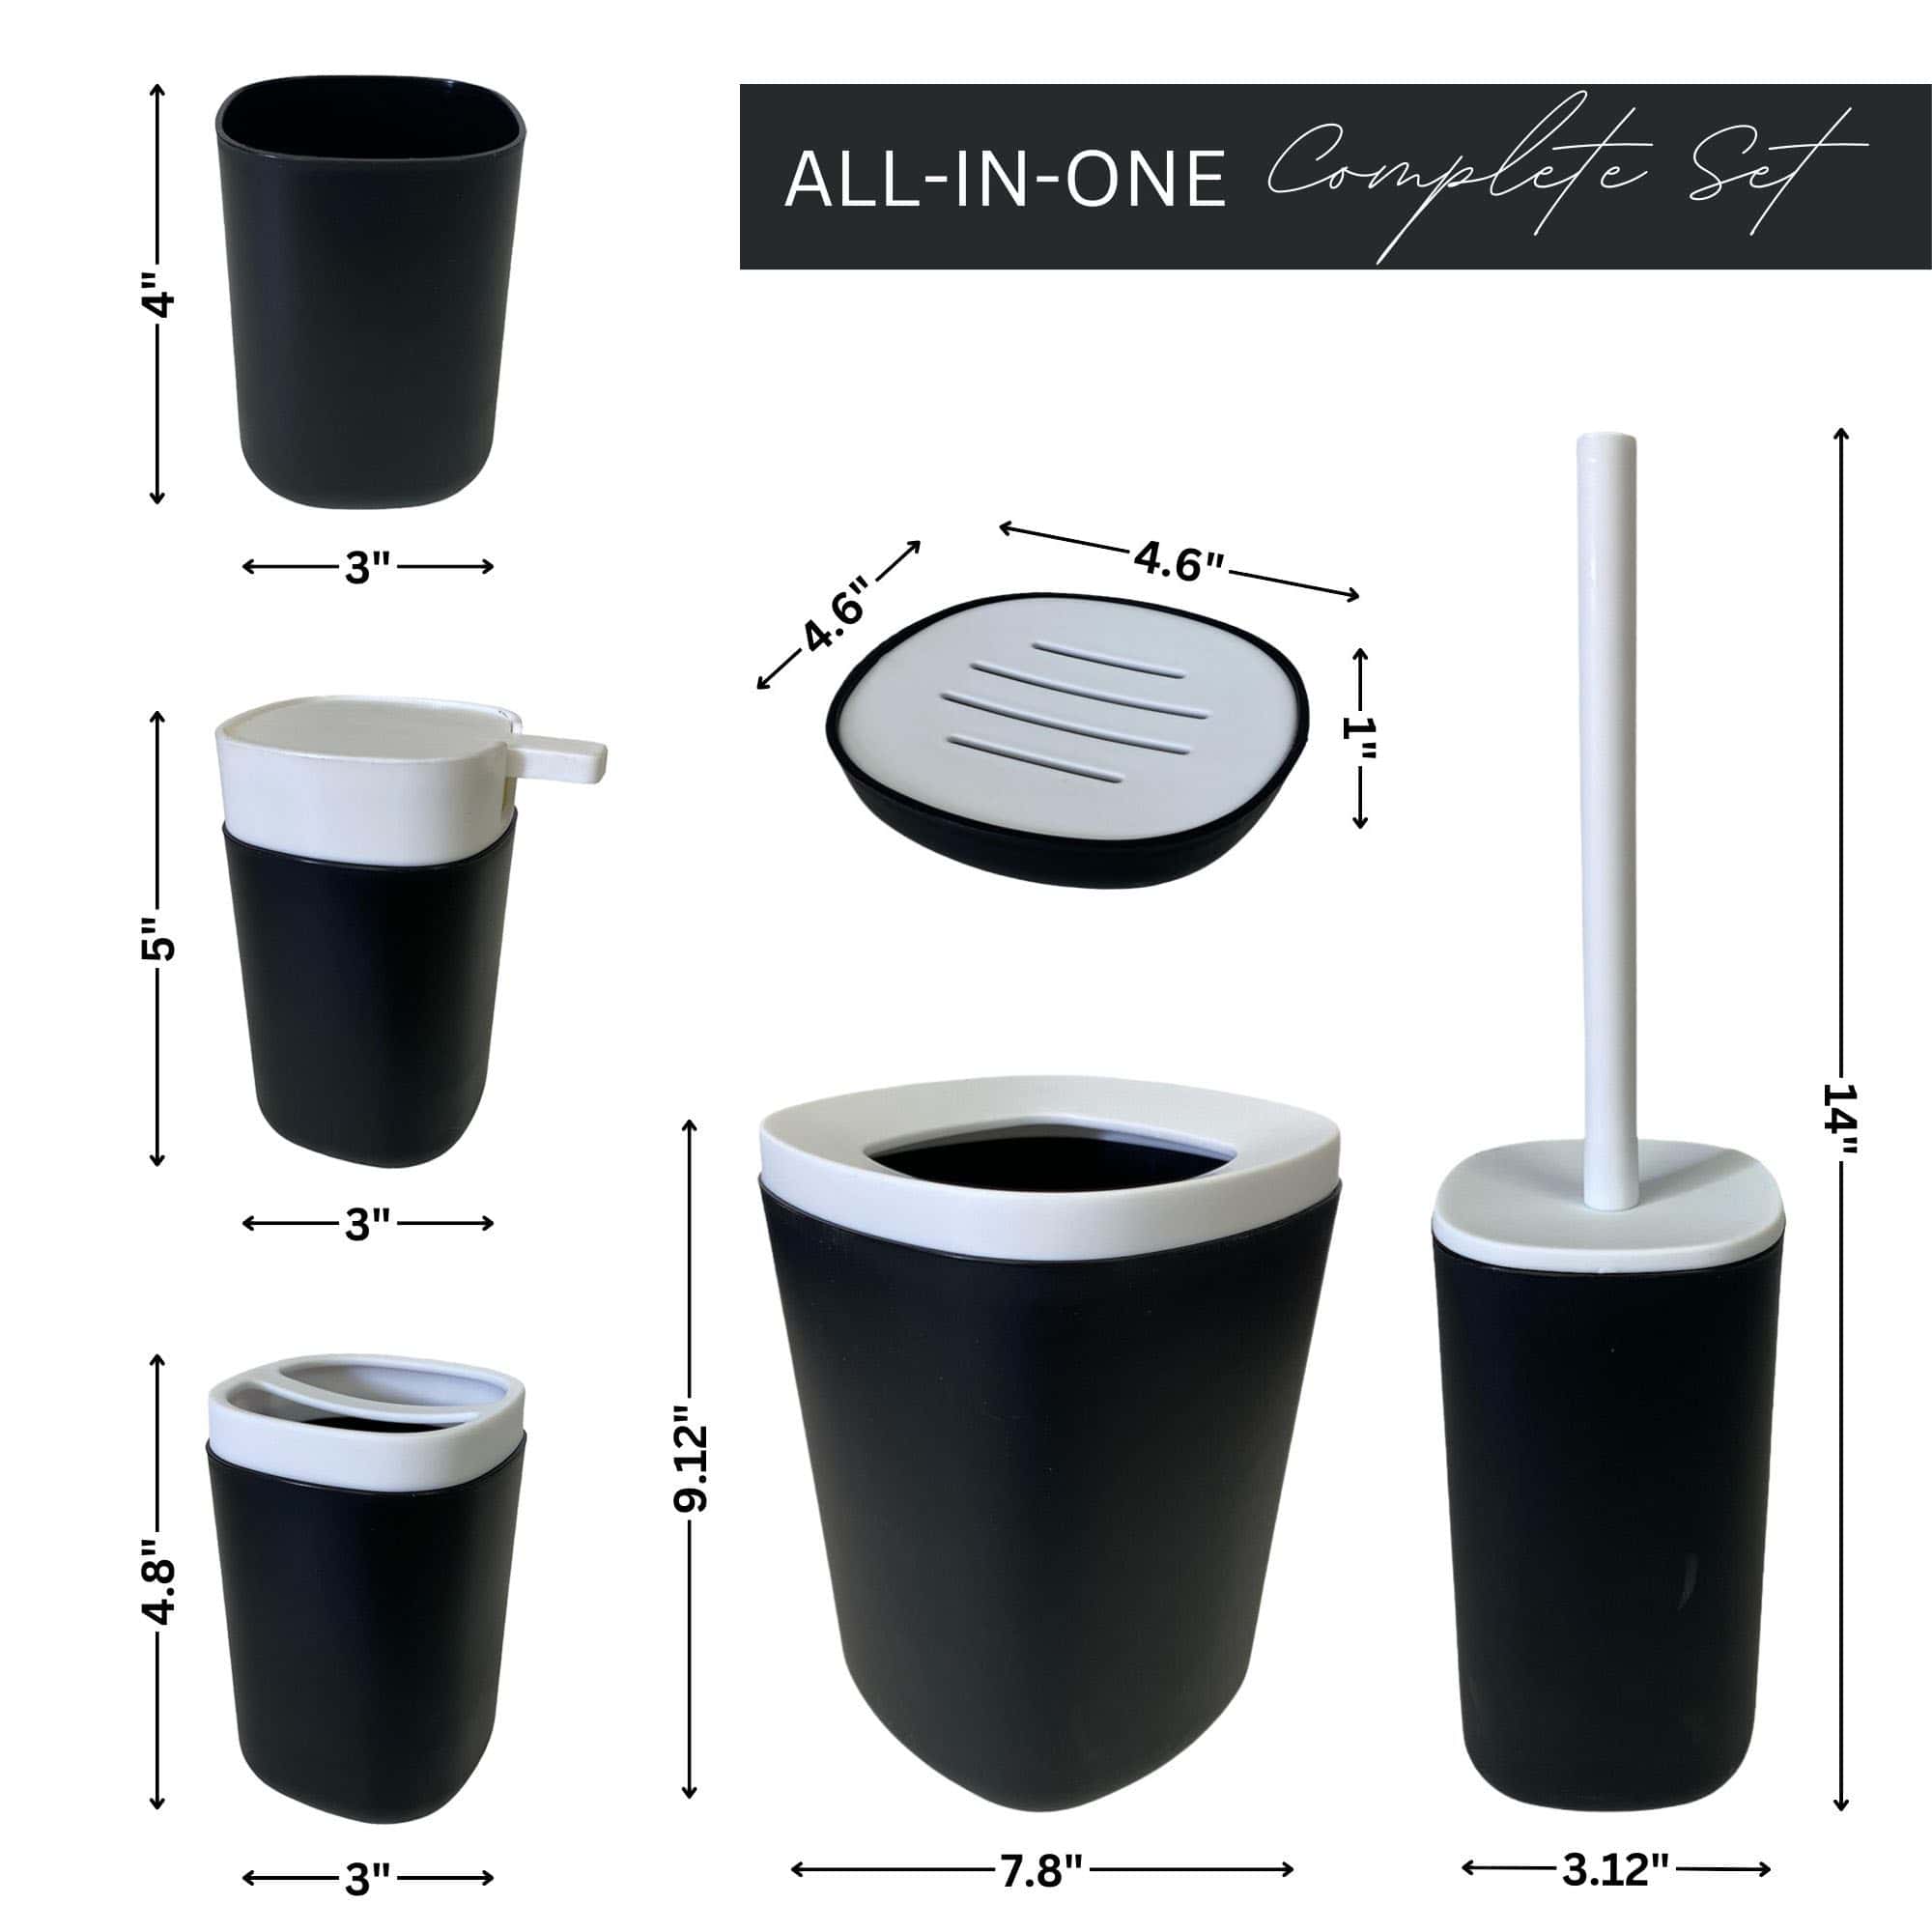 All-in-one complete set for modern bathroom, perfect dimensions for a clean bathroom space